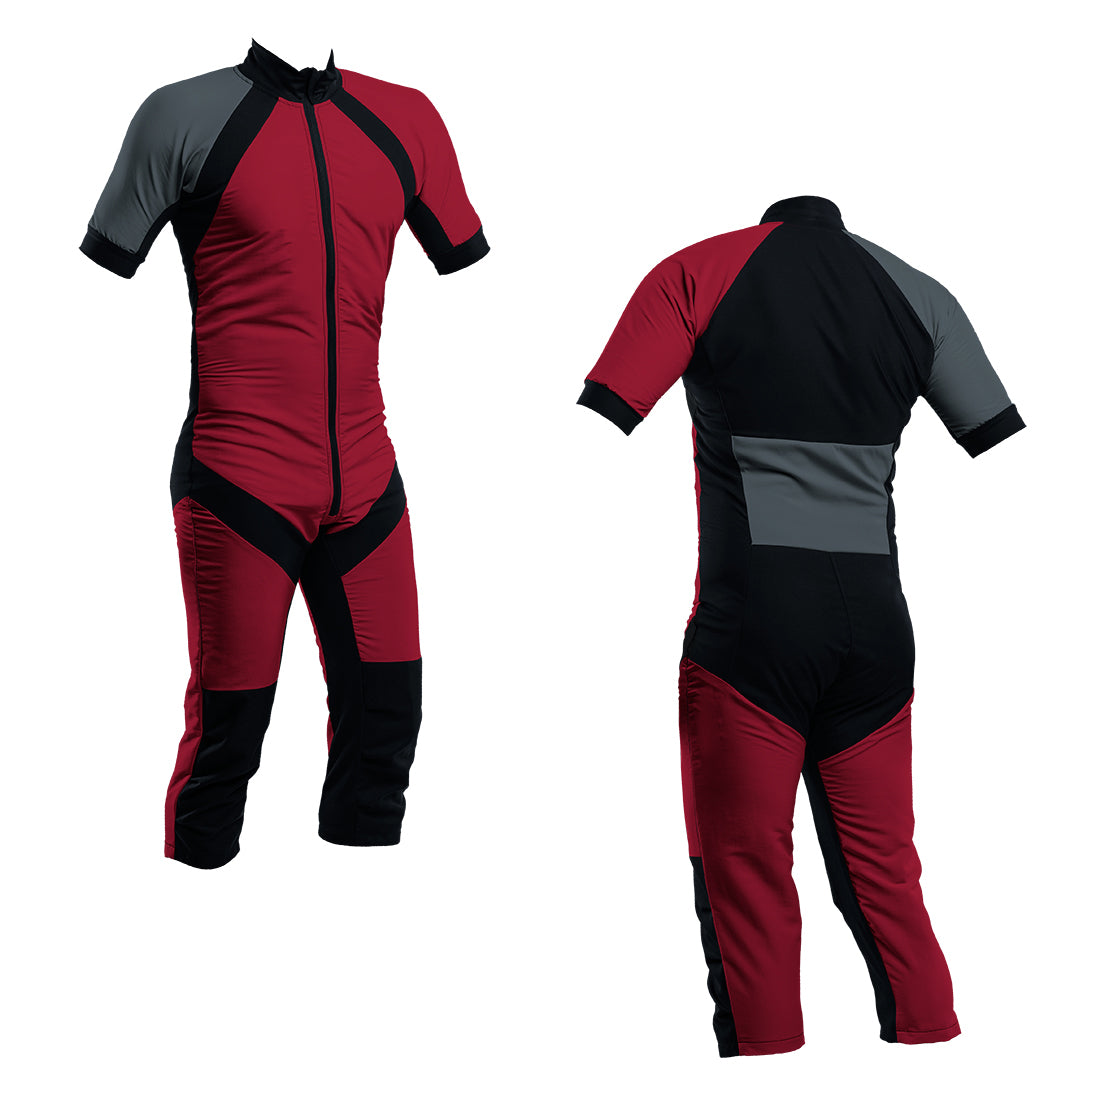 Skydiving Summer Suit Paprika-Charcoal S2-03